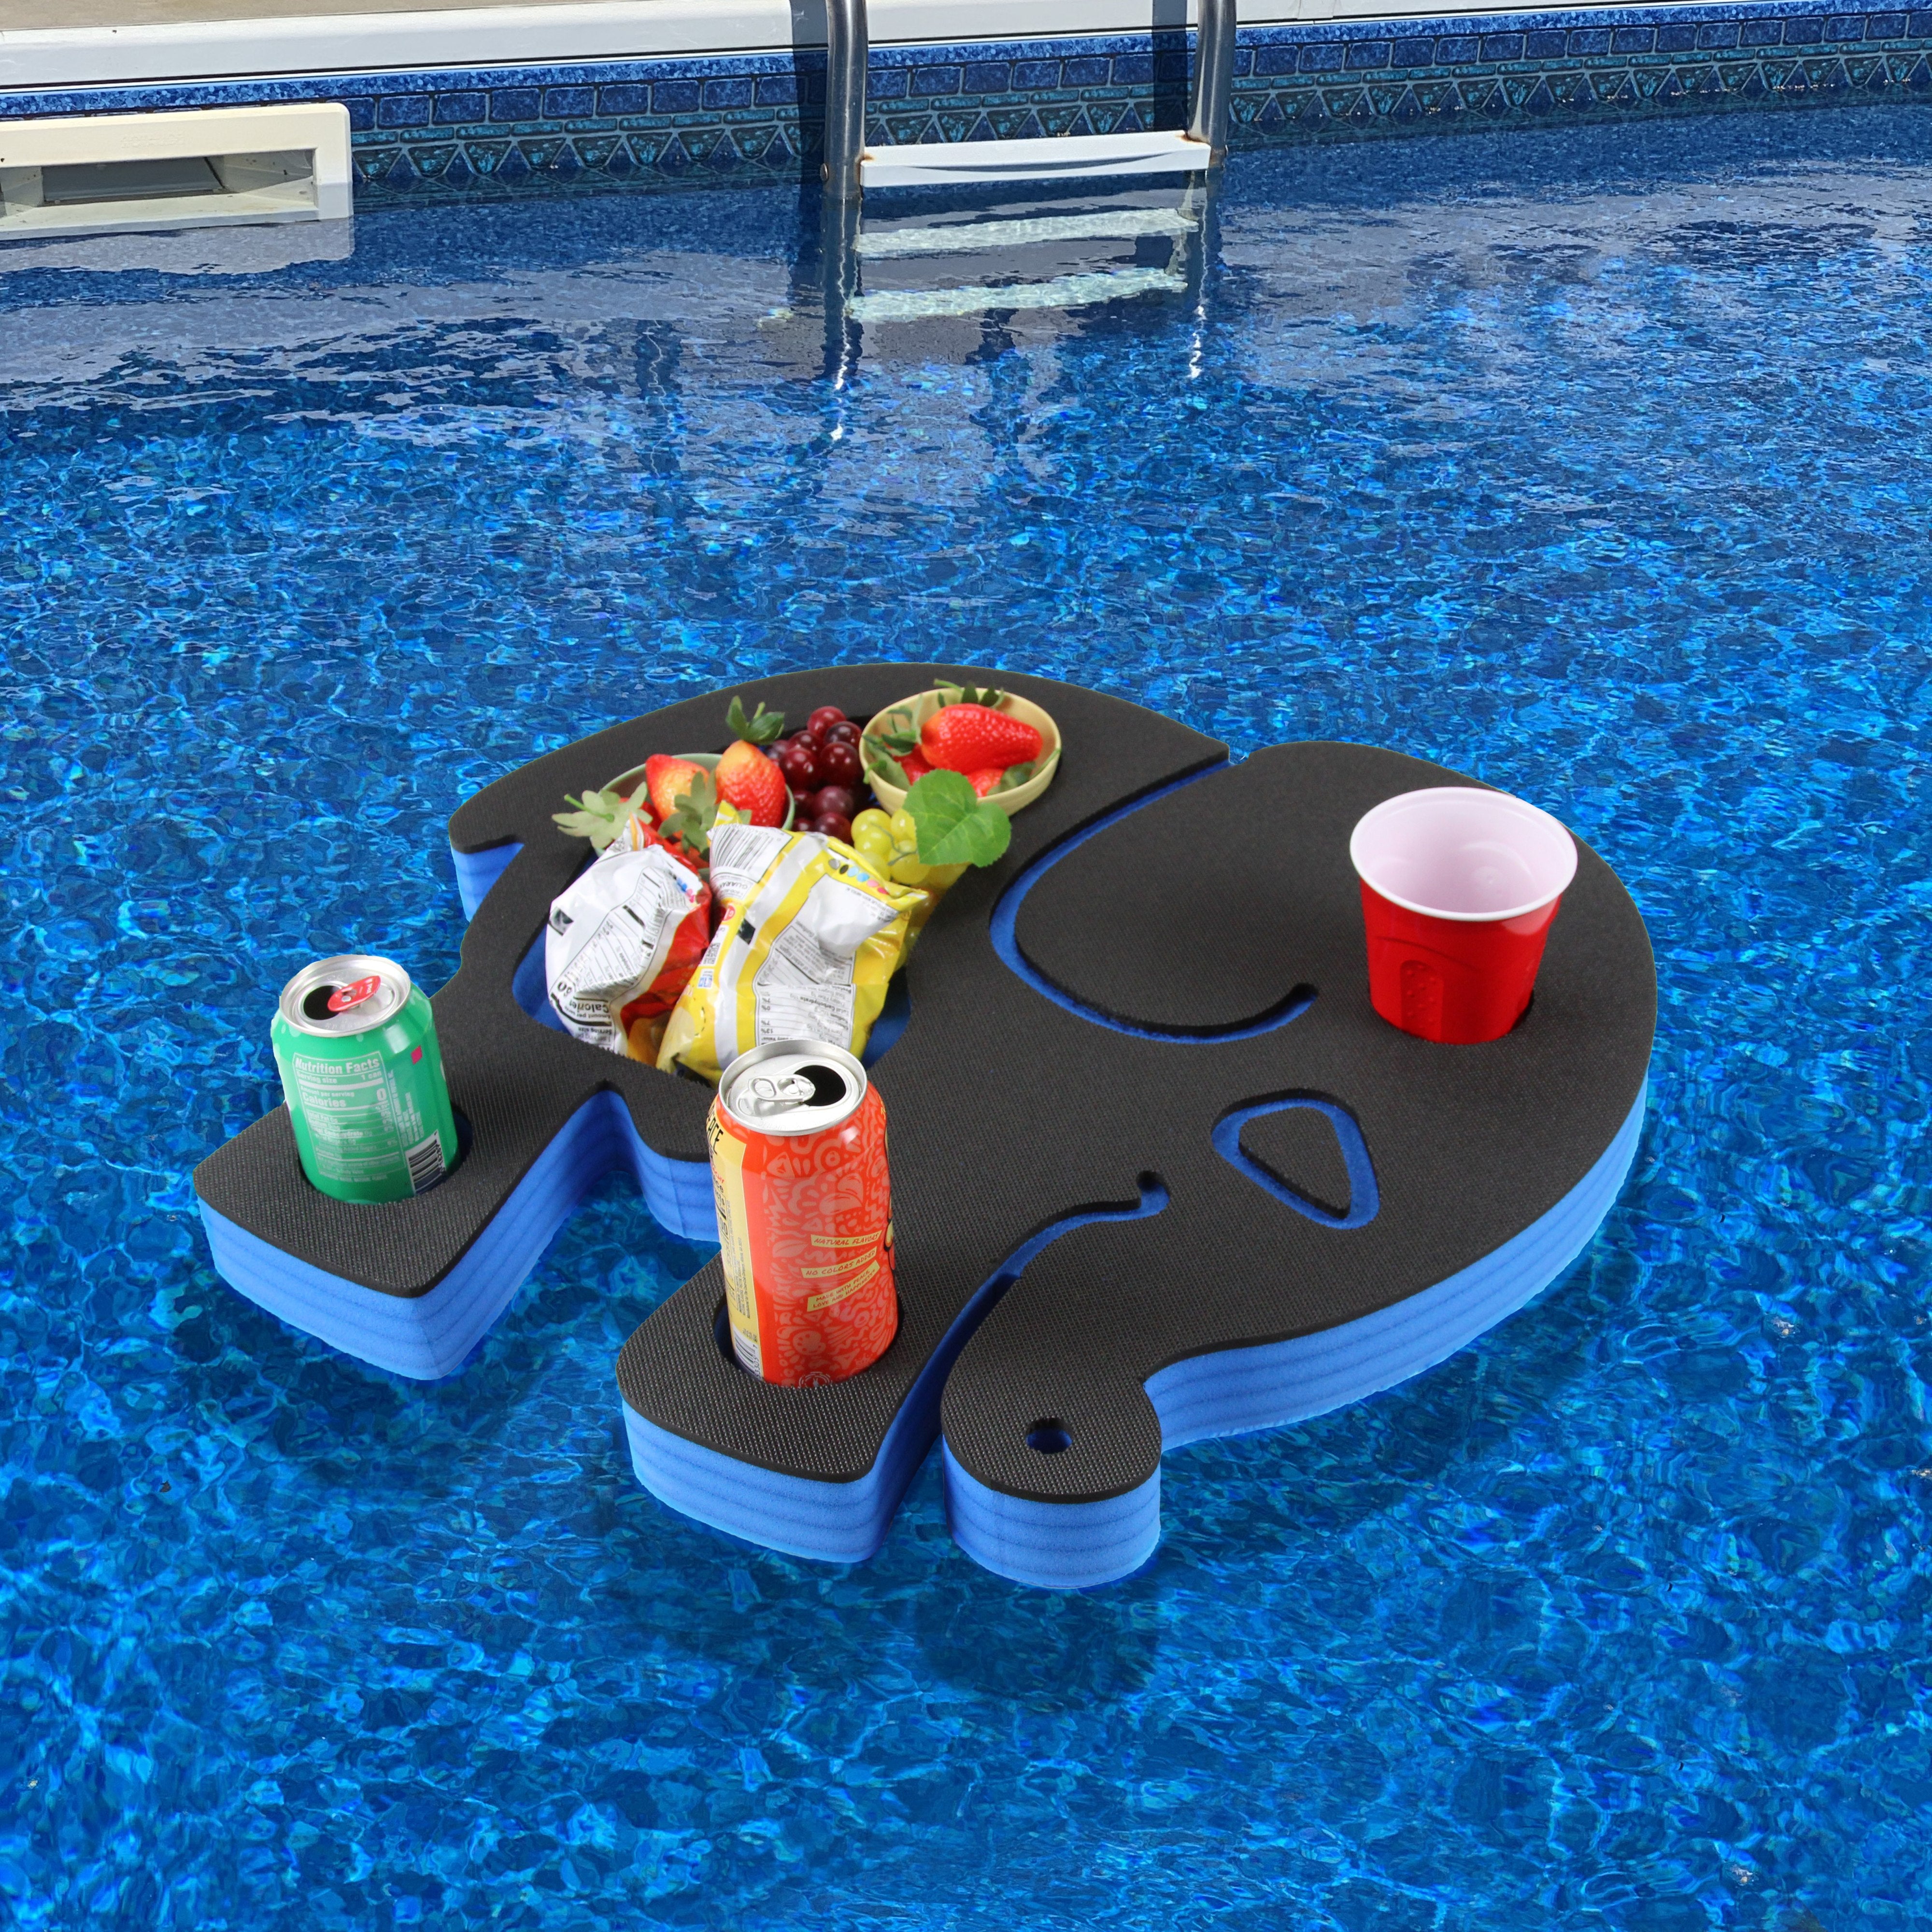 Elephant Shaped Drink Holder Refreshment Table Tray PoolBeach Party Float Lounge Durable Foam 4 Compartment UV Resistant Cup Holders 23.5 Inches